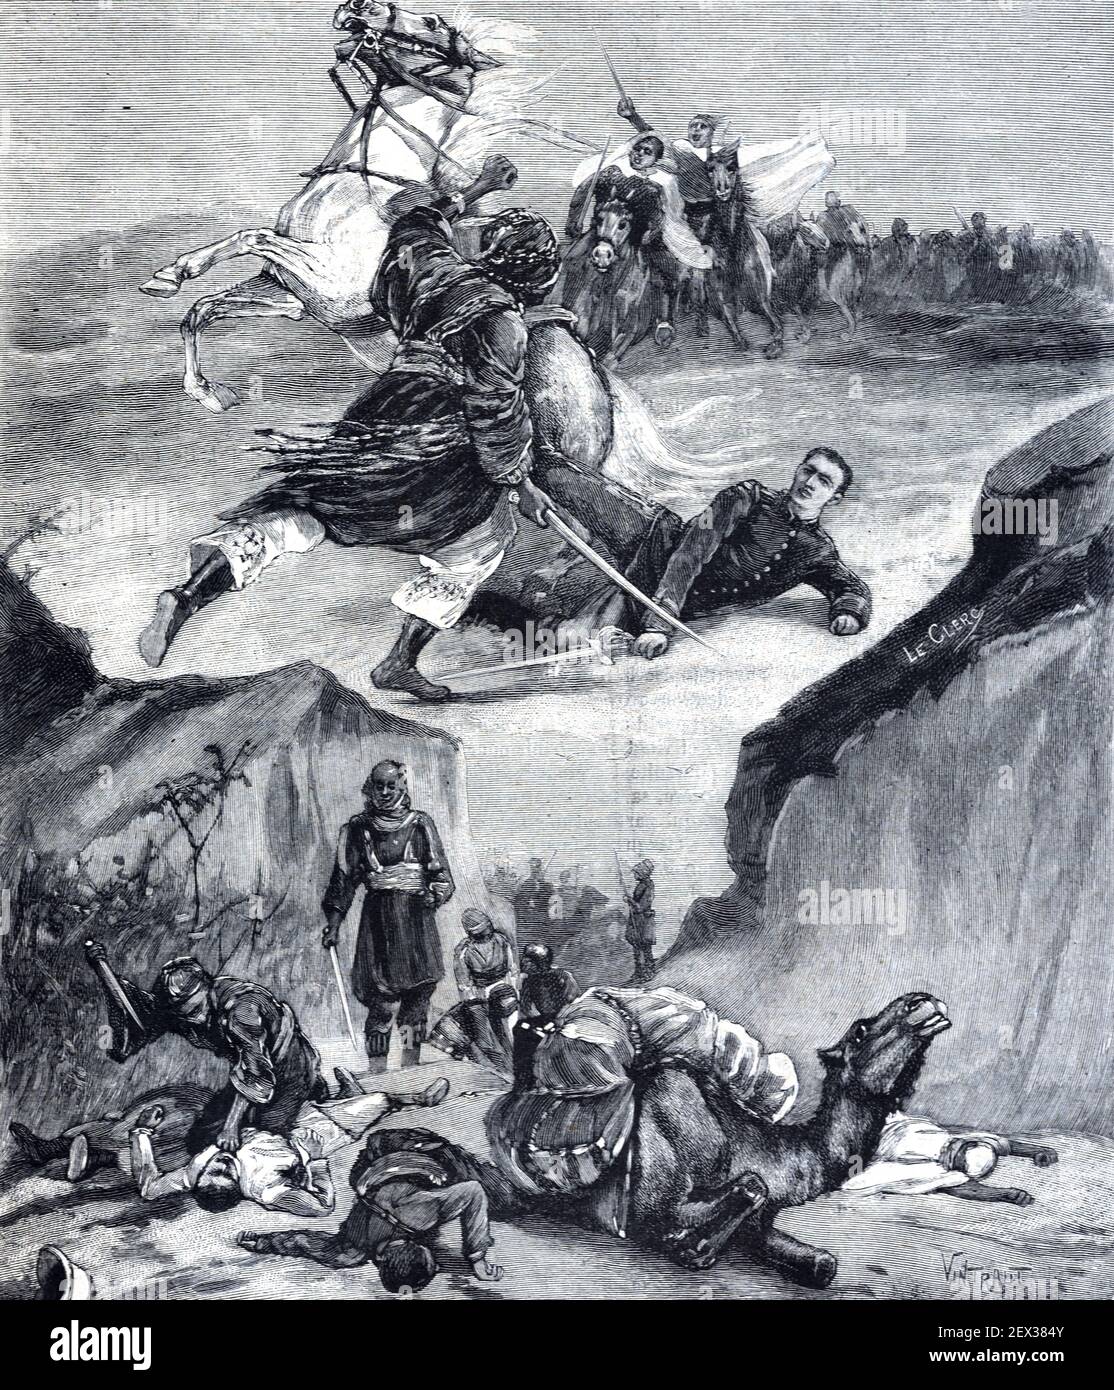 Victimes of the Desert Murder of French Lietenant Bérar & the Marqis de Morès by Tuareg Rebels in the Sahara Desert North Africa. Marquis de Morès (1858-96), was a Controversial French Politician & Anti-Semite, who was Killed at El Ouatia Tunisia in 1896. Vintage Illustration or Old Engraving (1896) Stock Photo